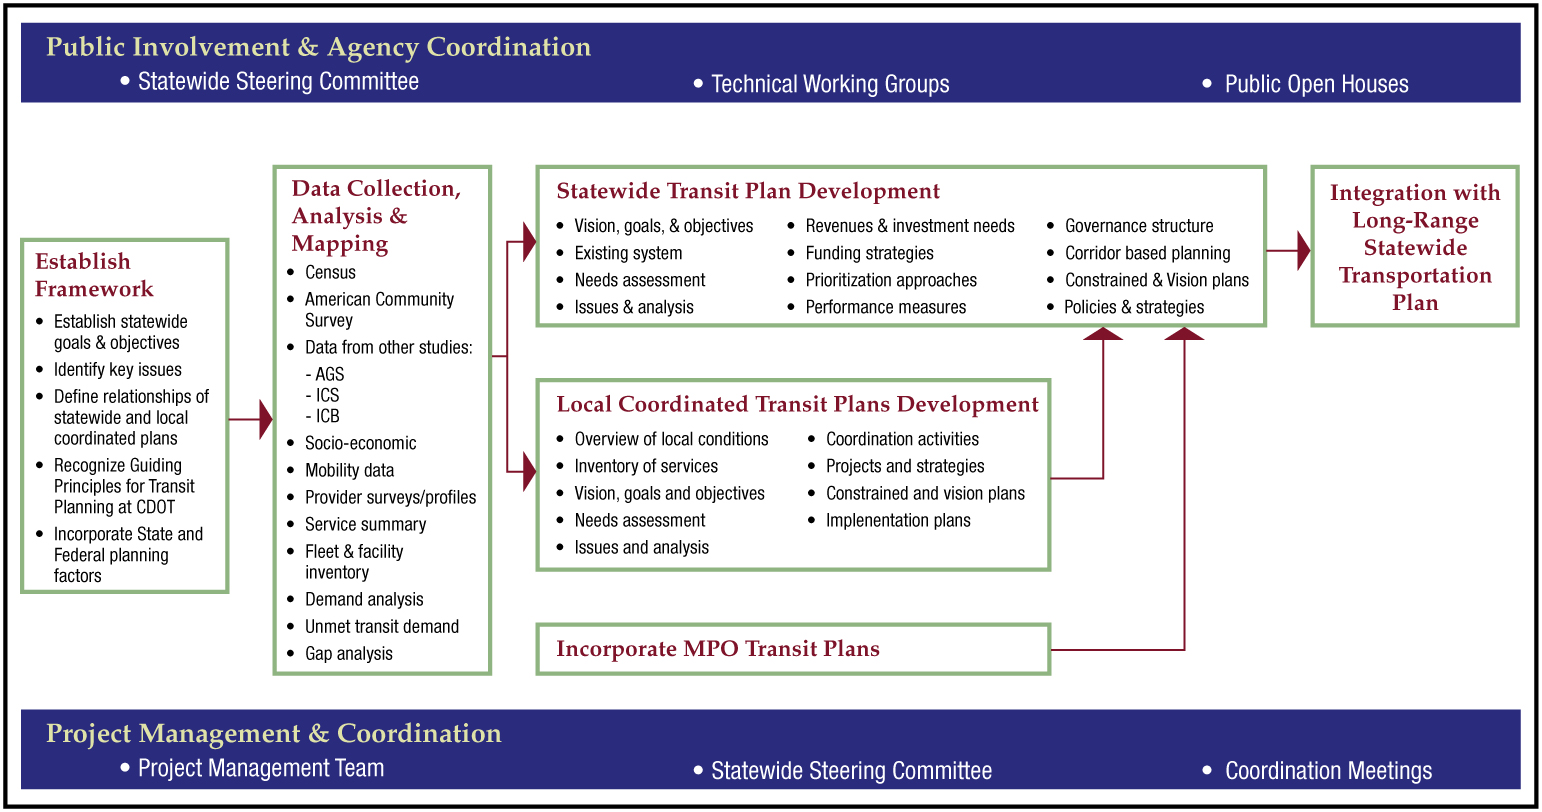 Work Plan-Public Involvement Agency Cooperation detail image